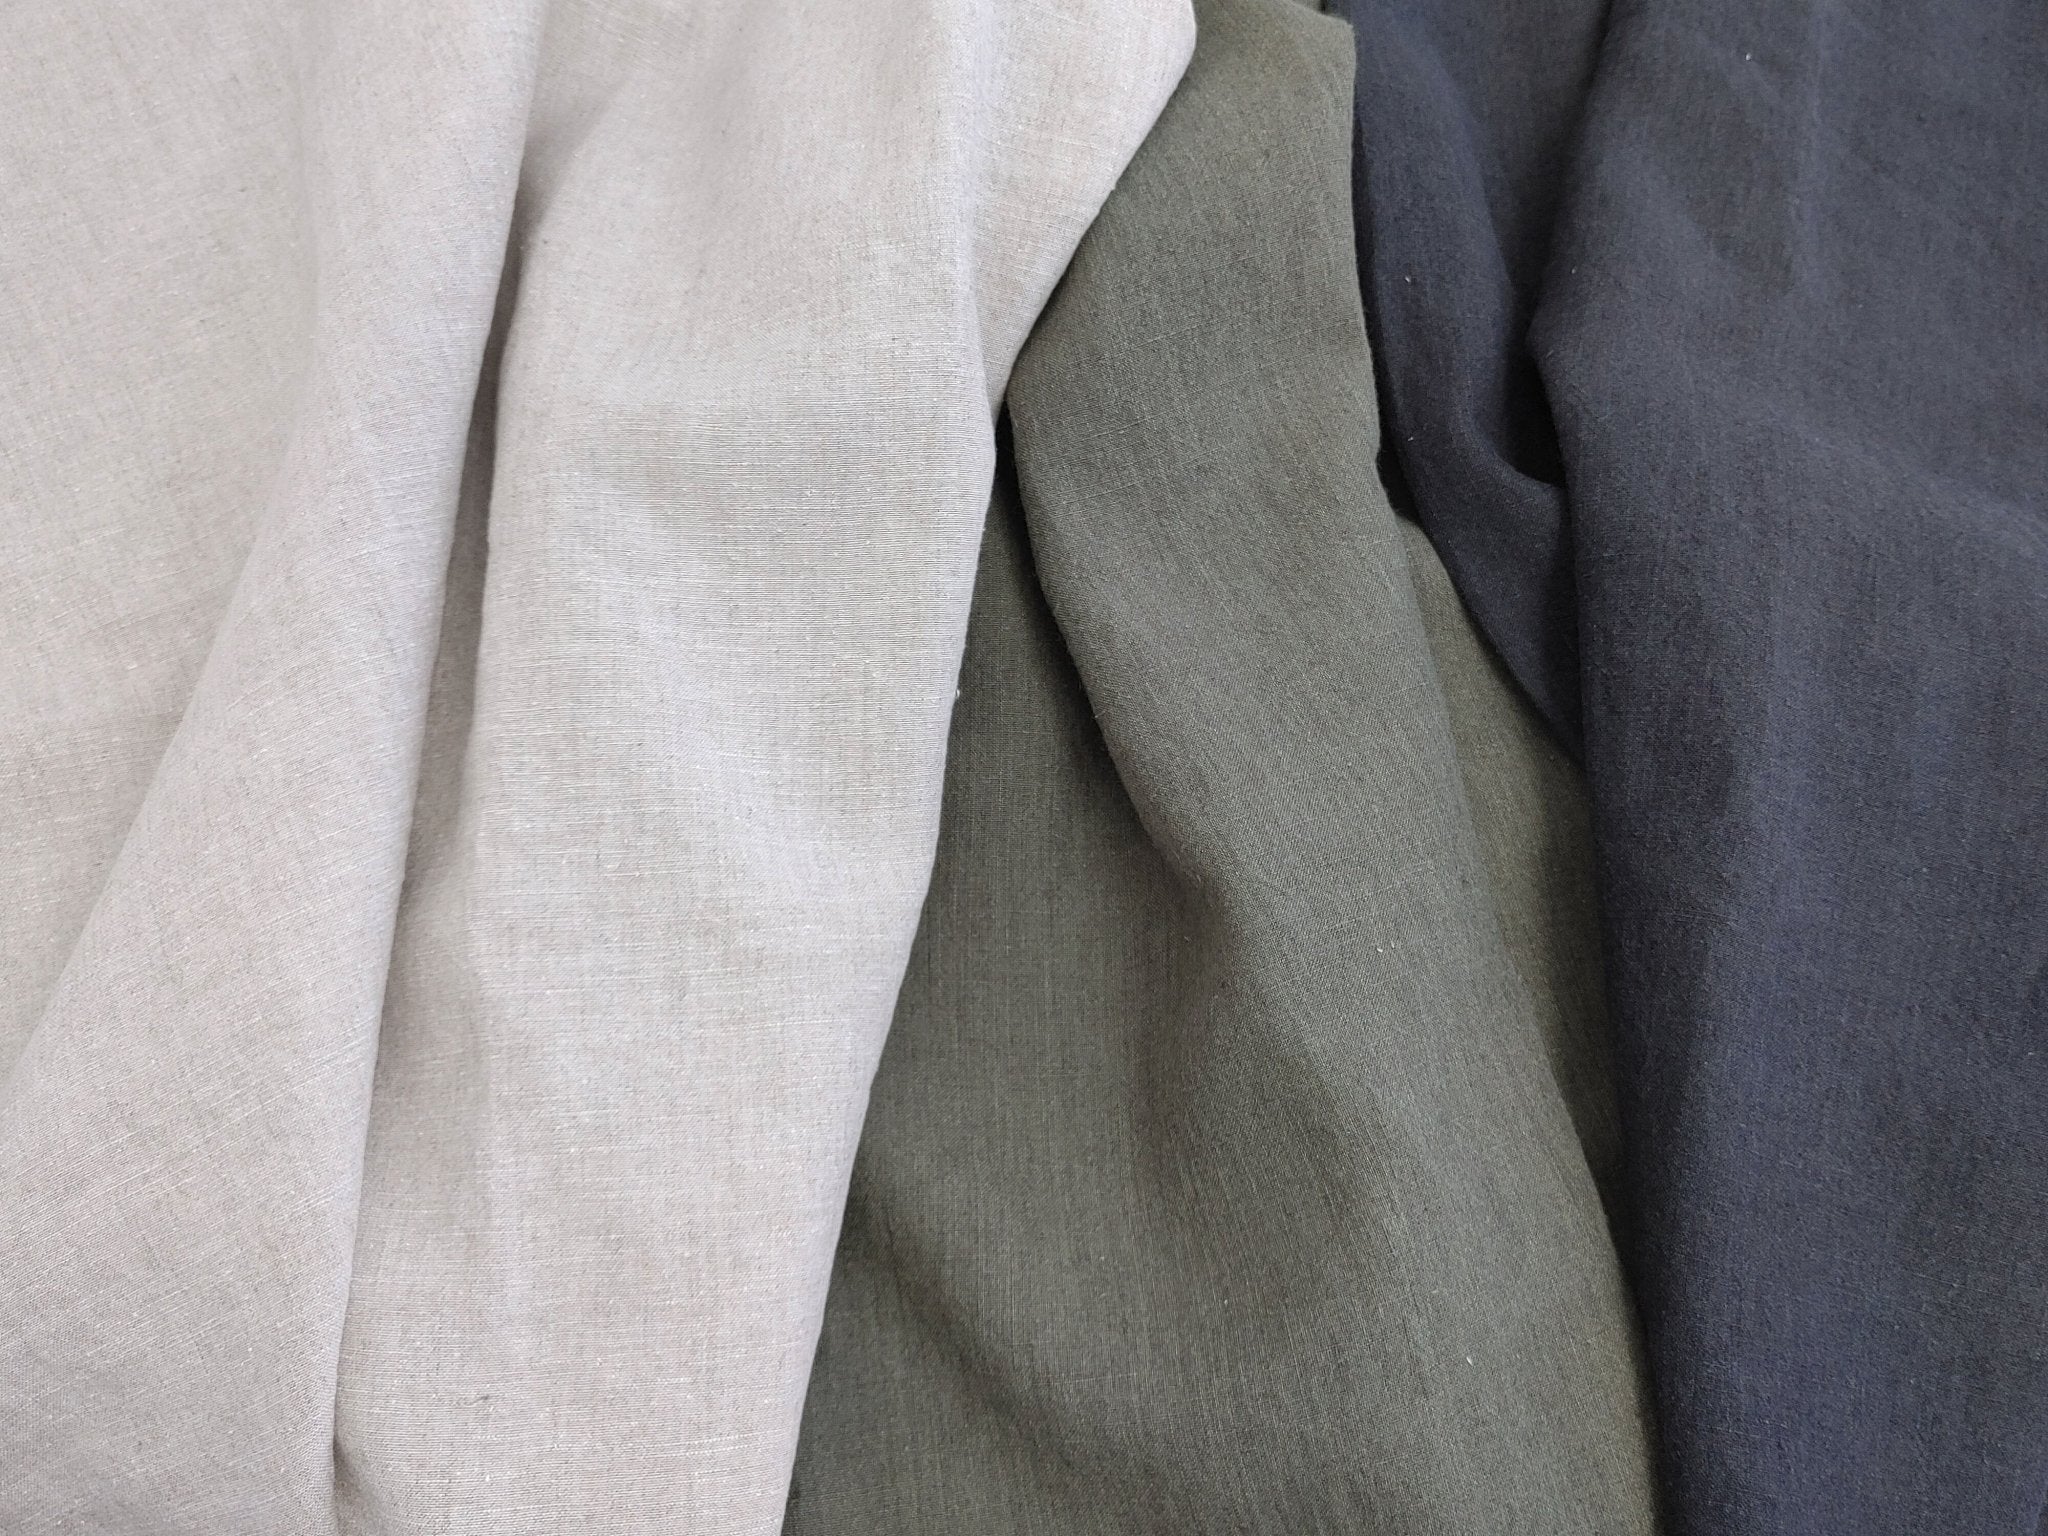 Vintage Dyed Medium Weight Linen Ramie Cotton Fabric with Plain Weave 7820 7771 7770 - The Linen Lab - Green